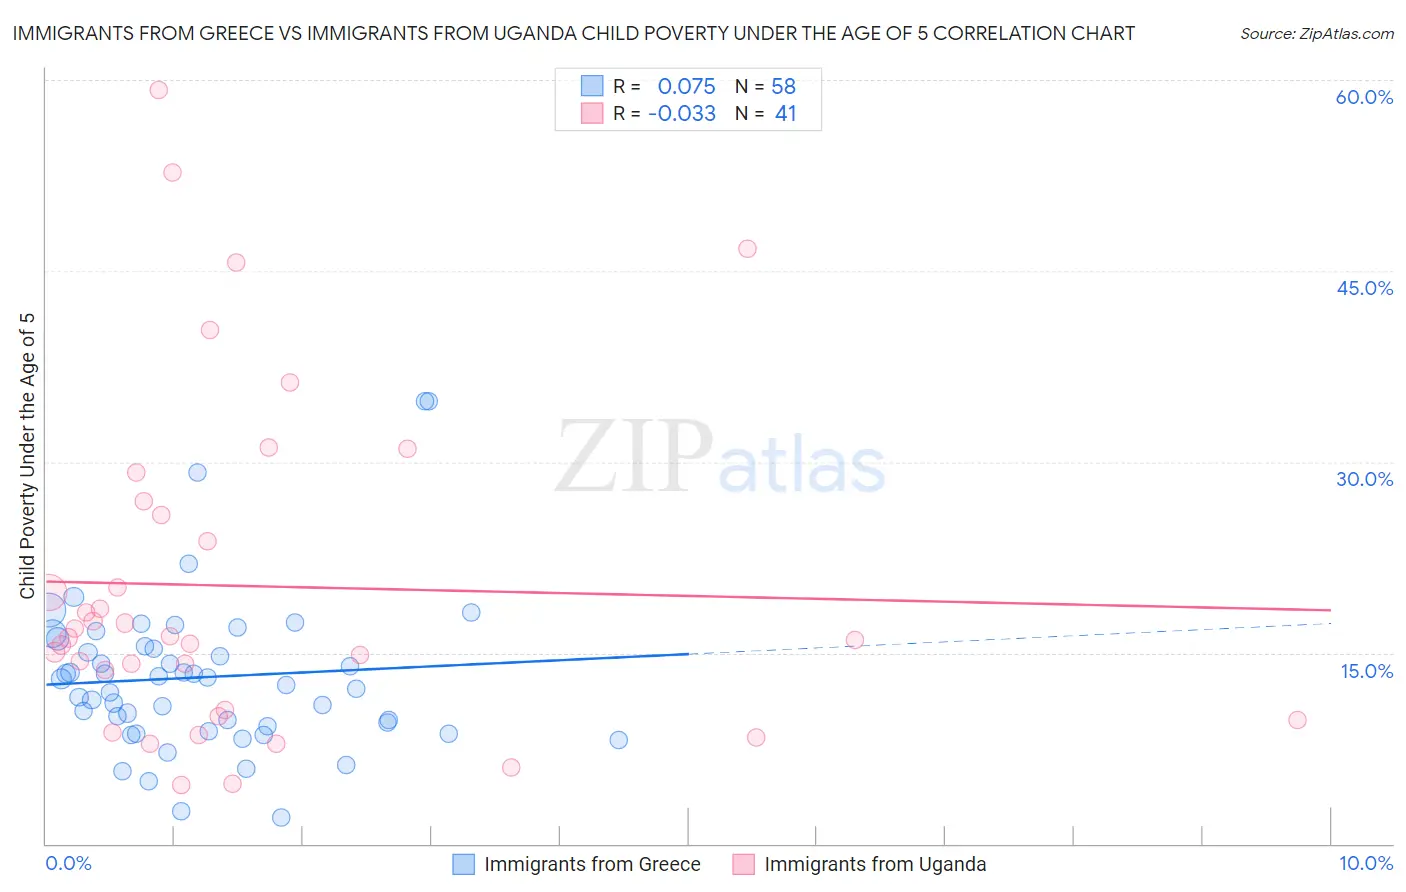 Immigrants from Greece vs Immigrants from Uganda Child Poverty Under the Age of 5